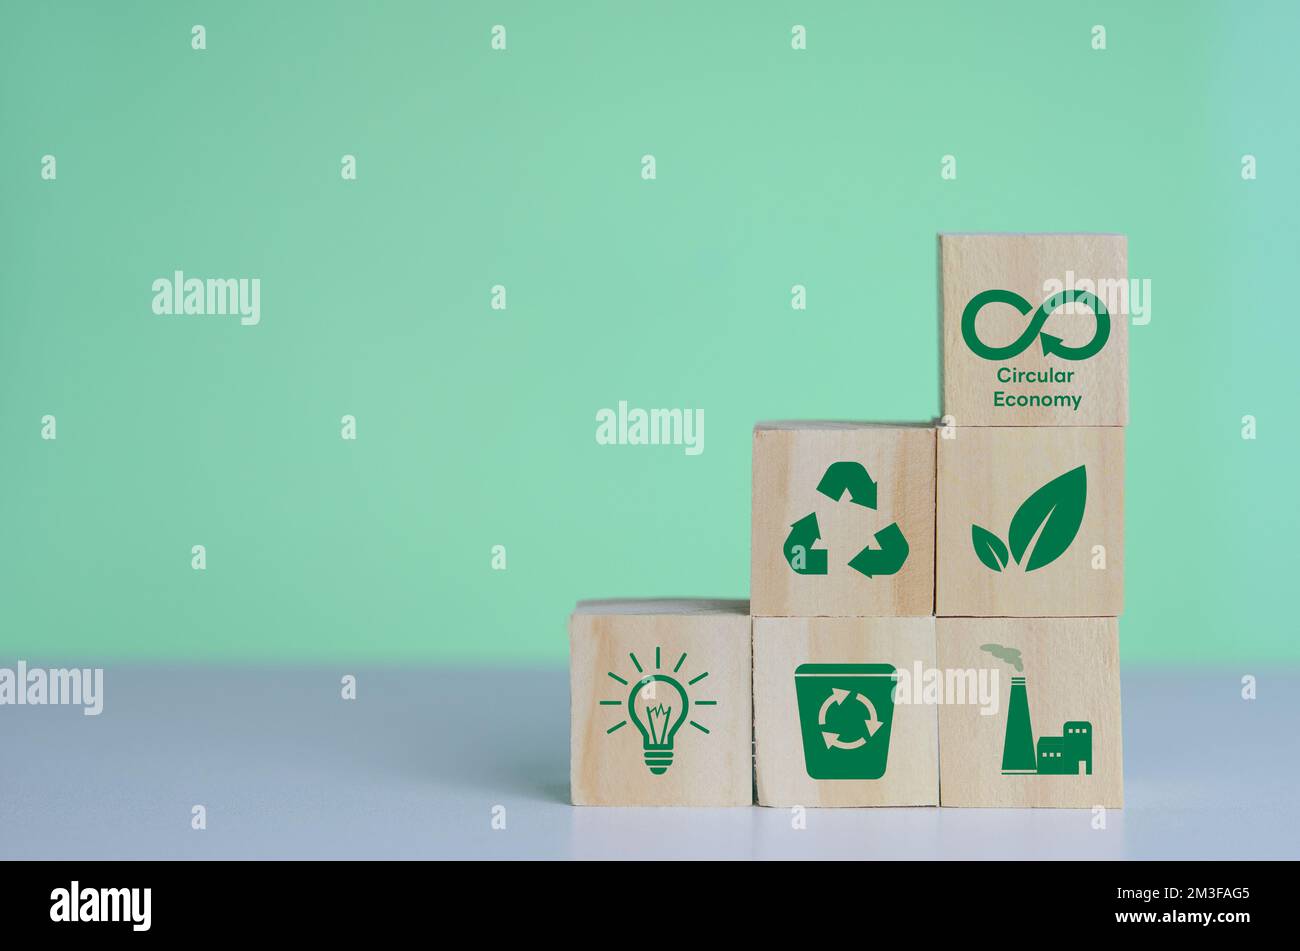 Net zero green technology innovation eco carbon renewable energy business Circular Economy concept with wood cube blocks. Stock Photo